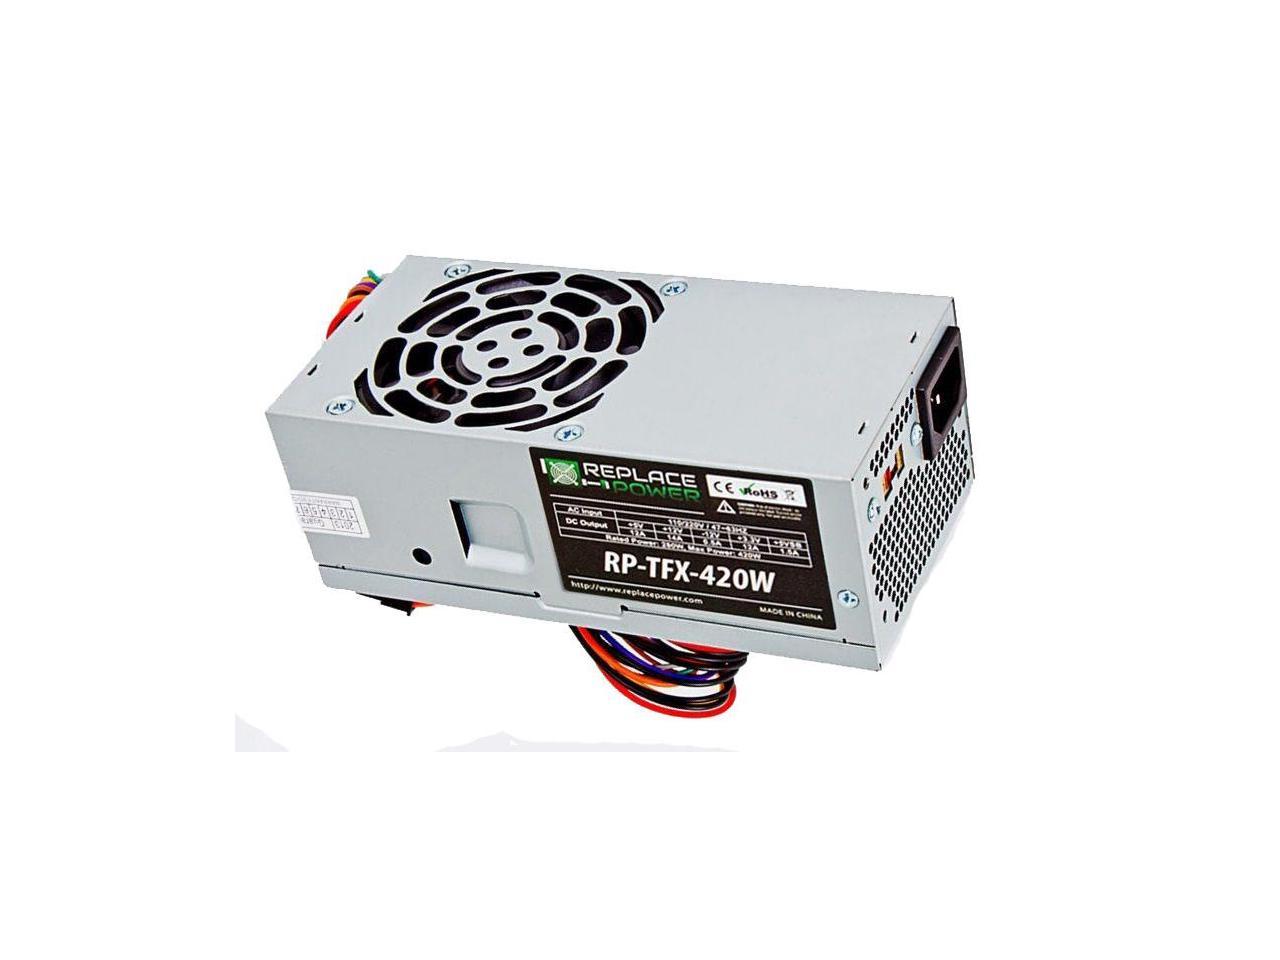 Replacement Power Supply for Delta DPS-220AB-2 DCSLF PS-5251-5 Slimline SFF NEW 